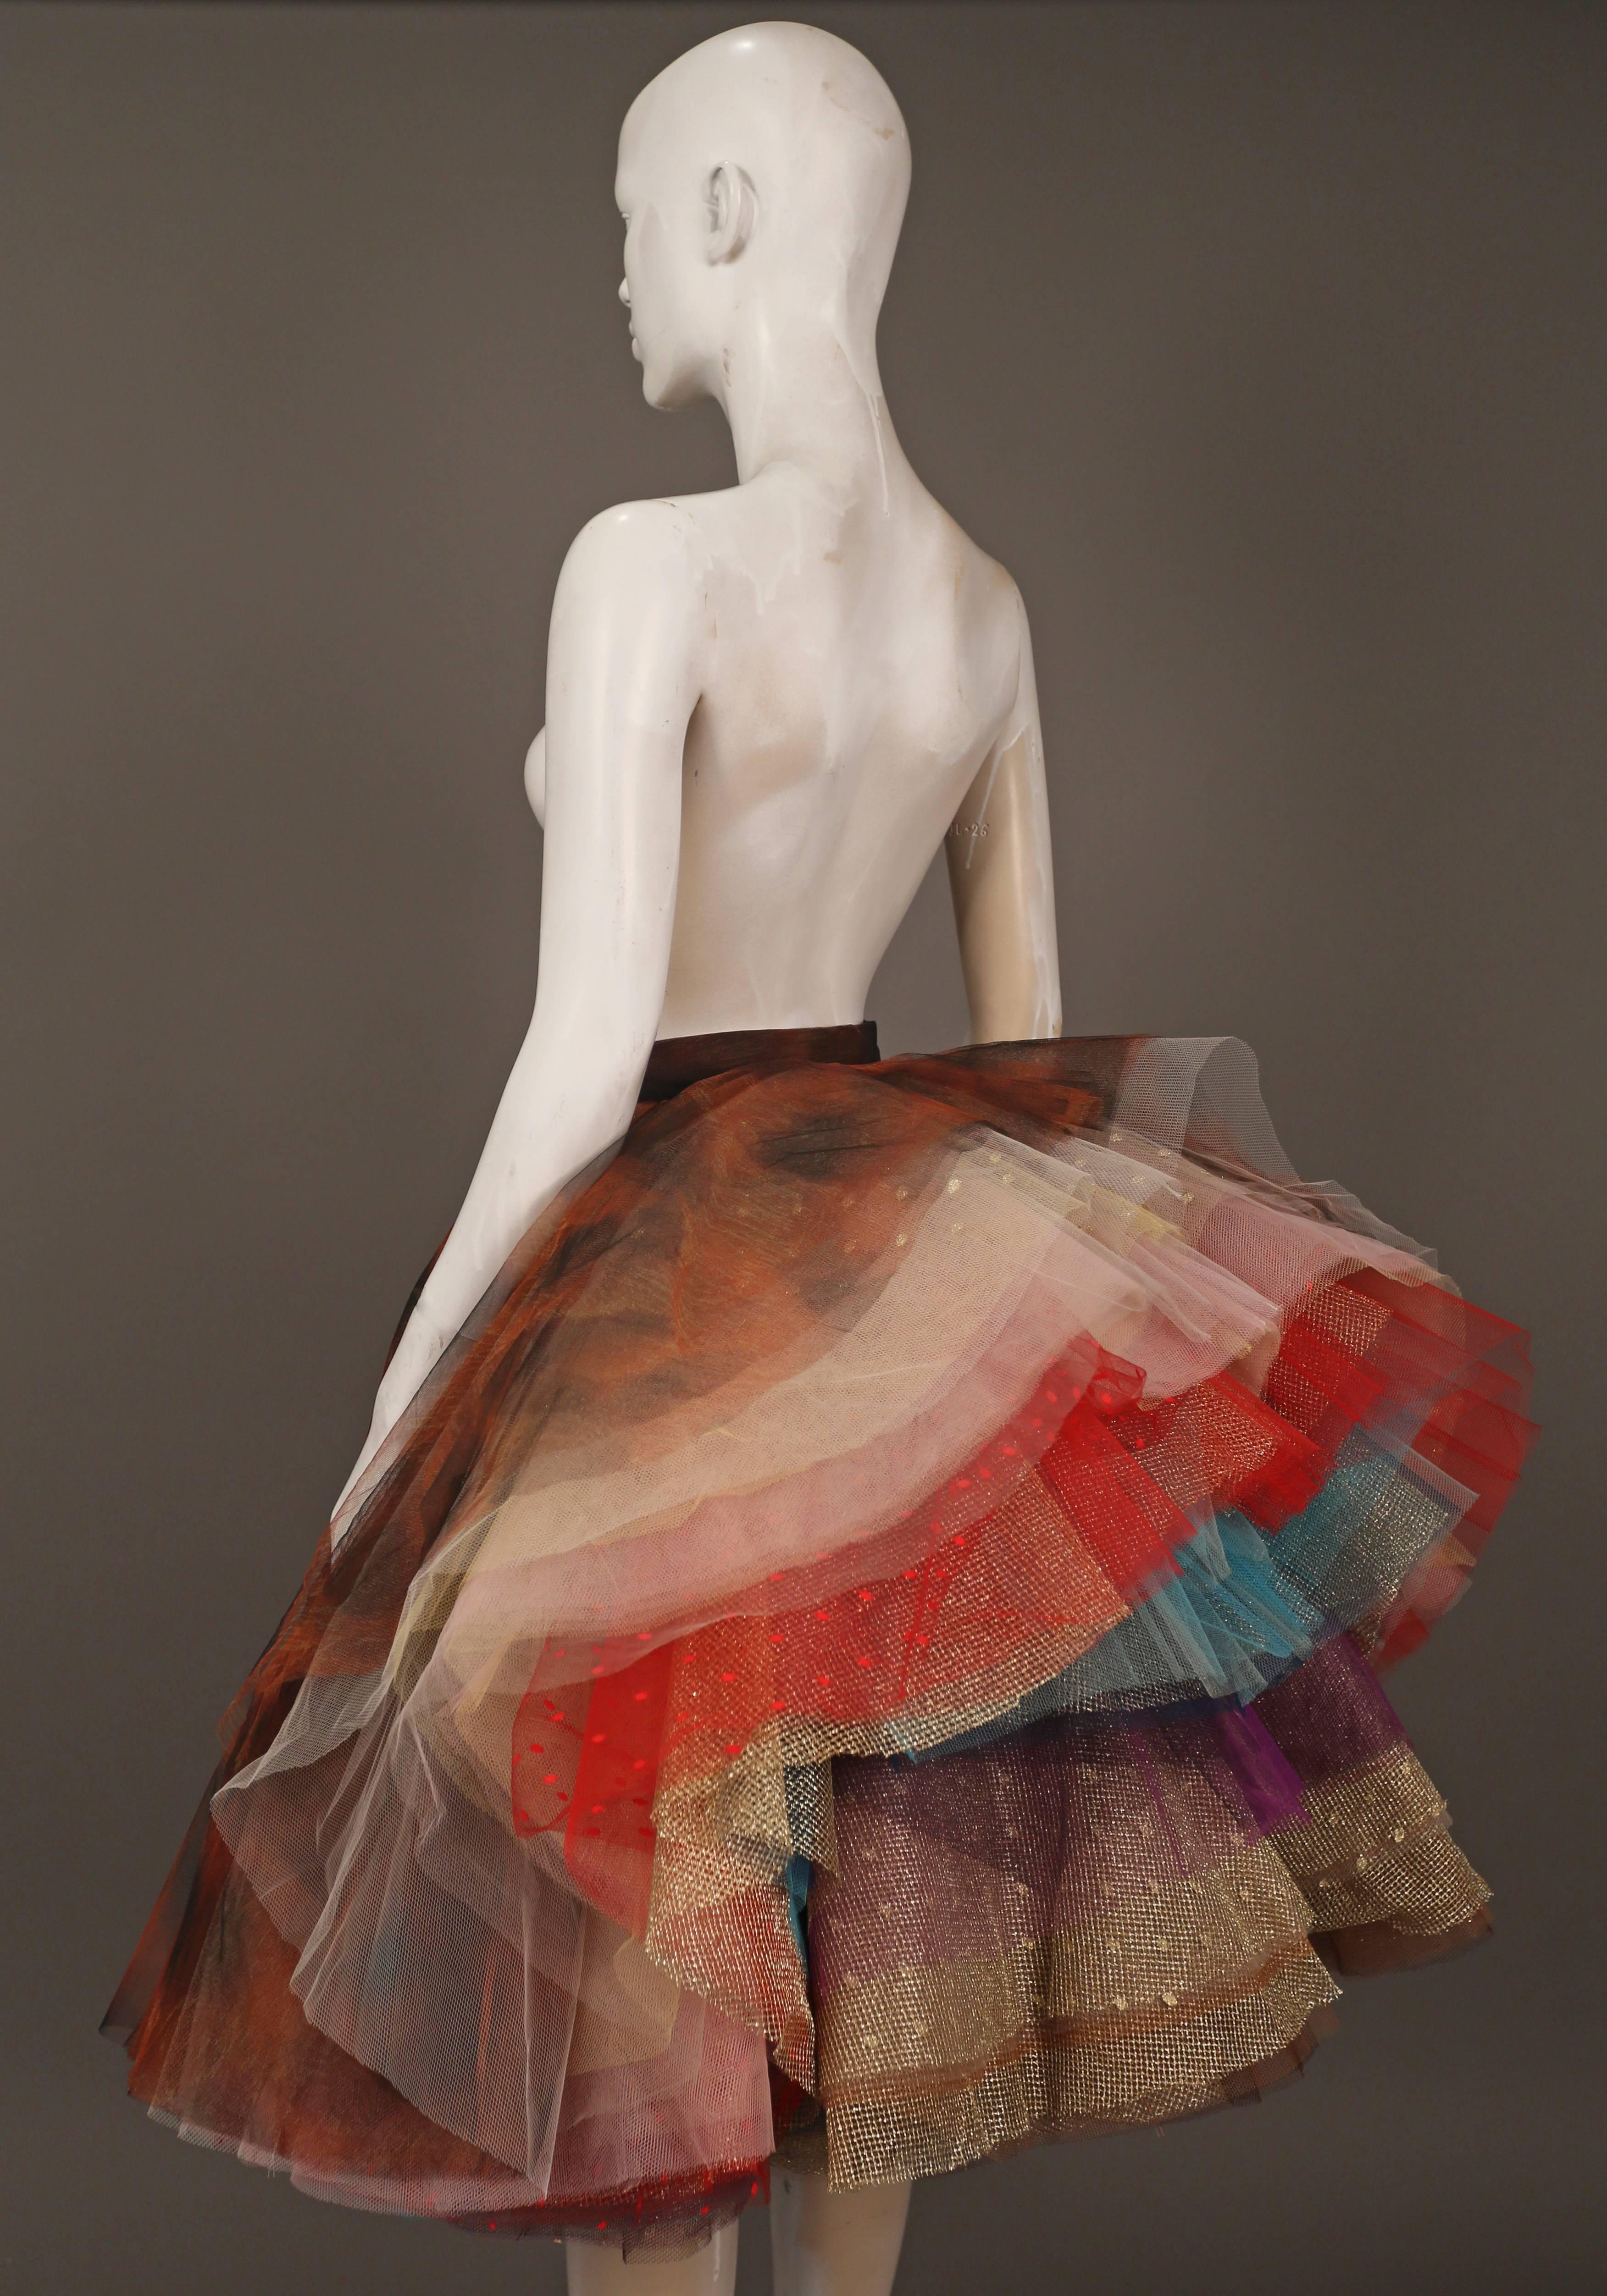 #ARTATTACK 

Super rare Vivienne Westwood 'EXPLOSION' layered tulle skirt, circa 1993. The skirt has 34 layers of tulle in various prints and colours, only 12 copies of this design were made and sold exclusively to Westwood's VIP clients.